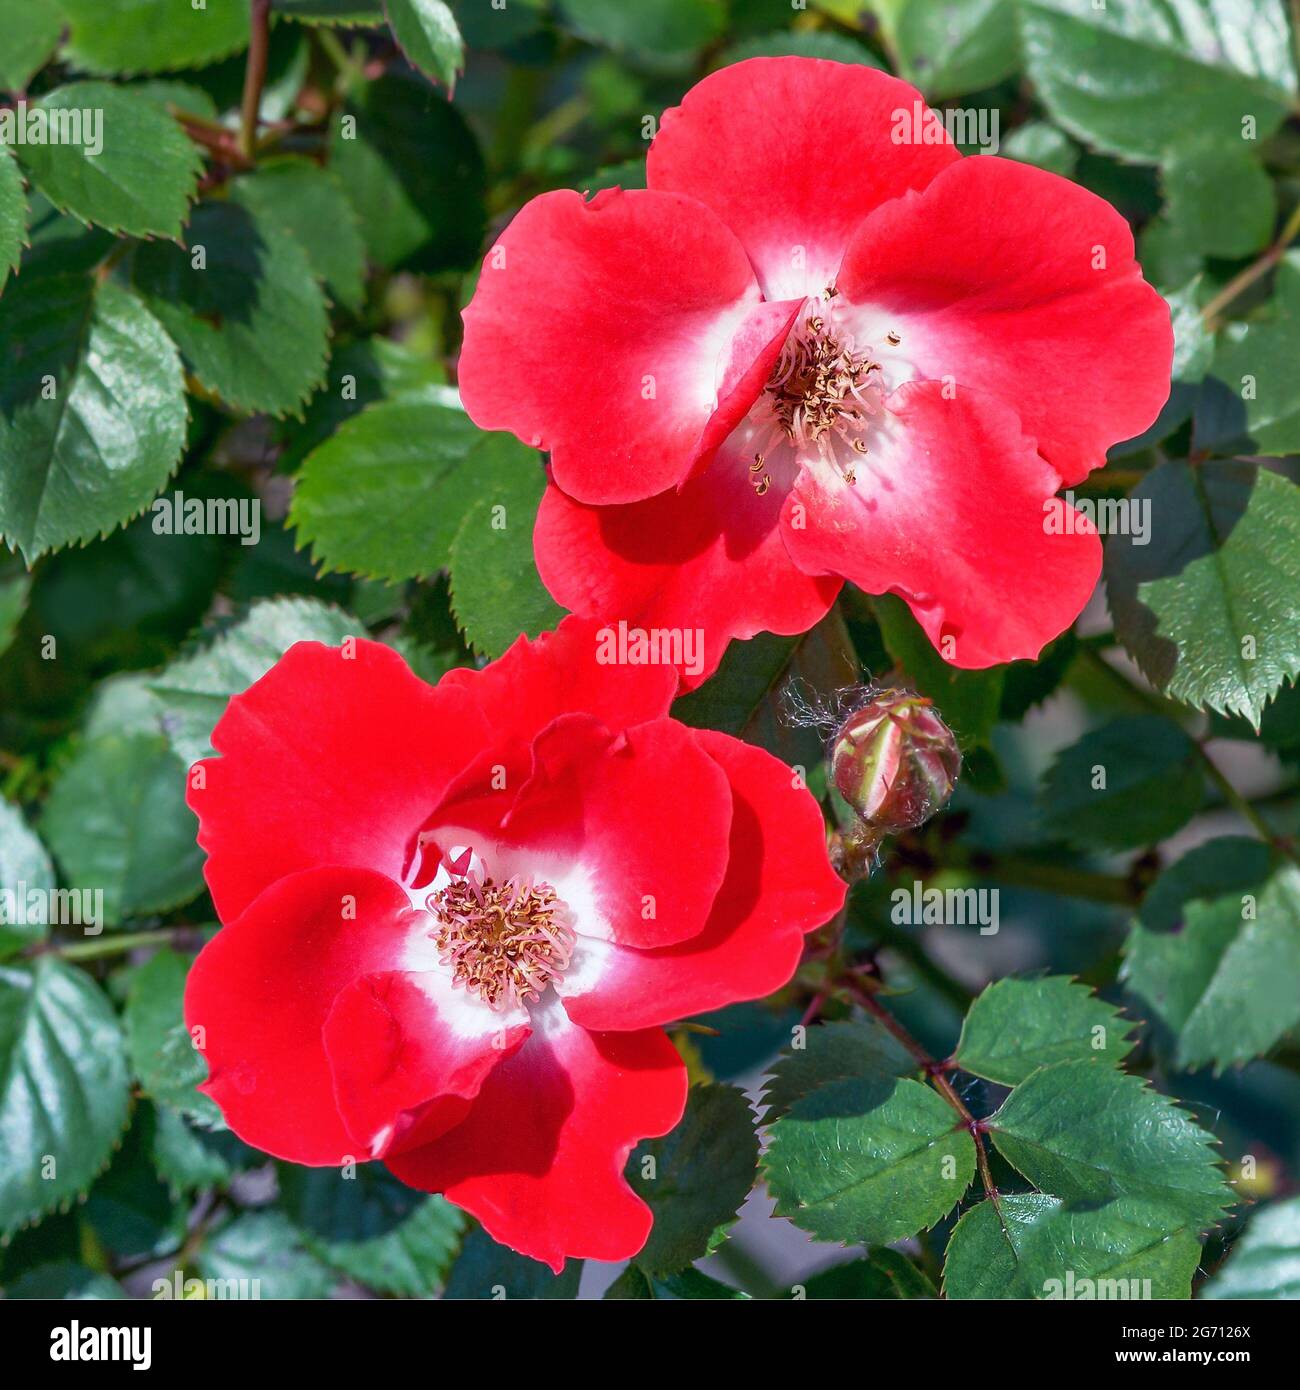 Ground cover rose 'Rouge Meilandecor' - crimson flowers with a white center and yellow stamens, simple 5-7cm in diameter. Stock Photo